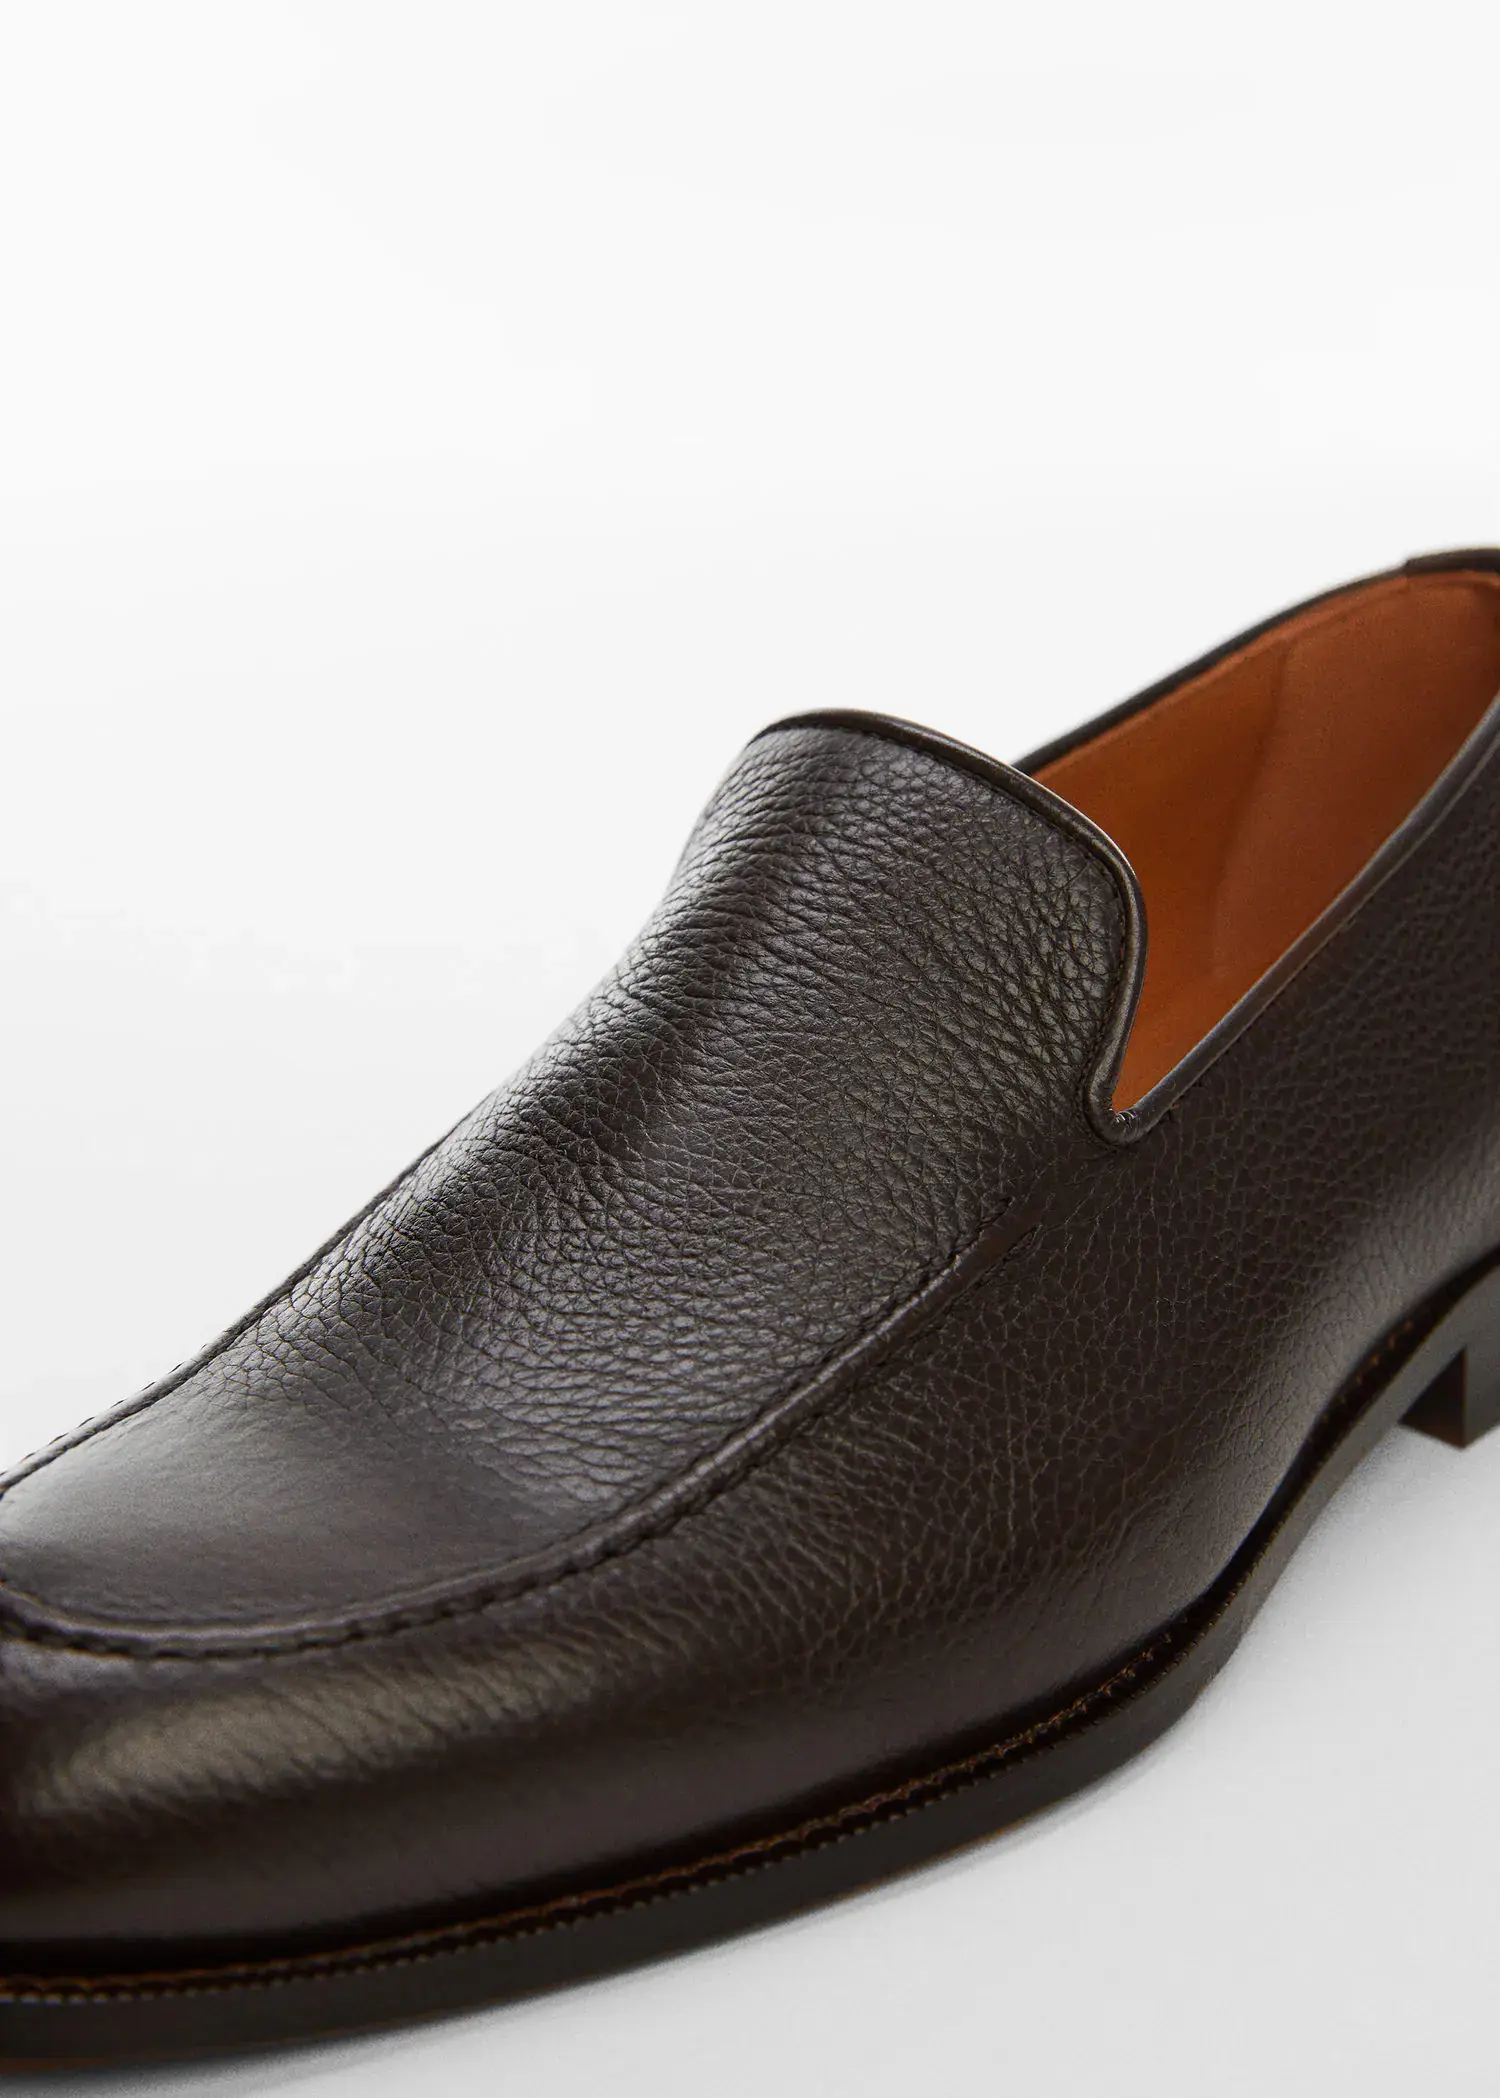 Mango Minimalist leather moccasins. a close-up of a brown loafer shoe. 